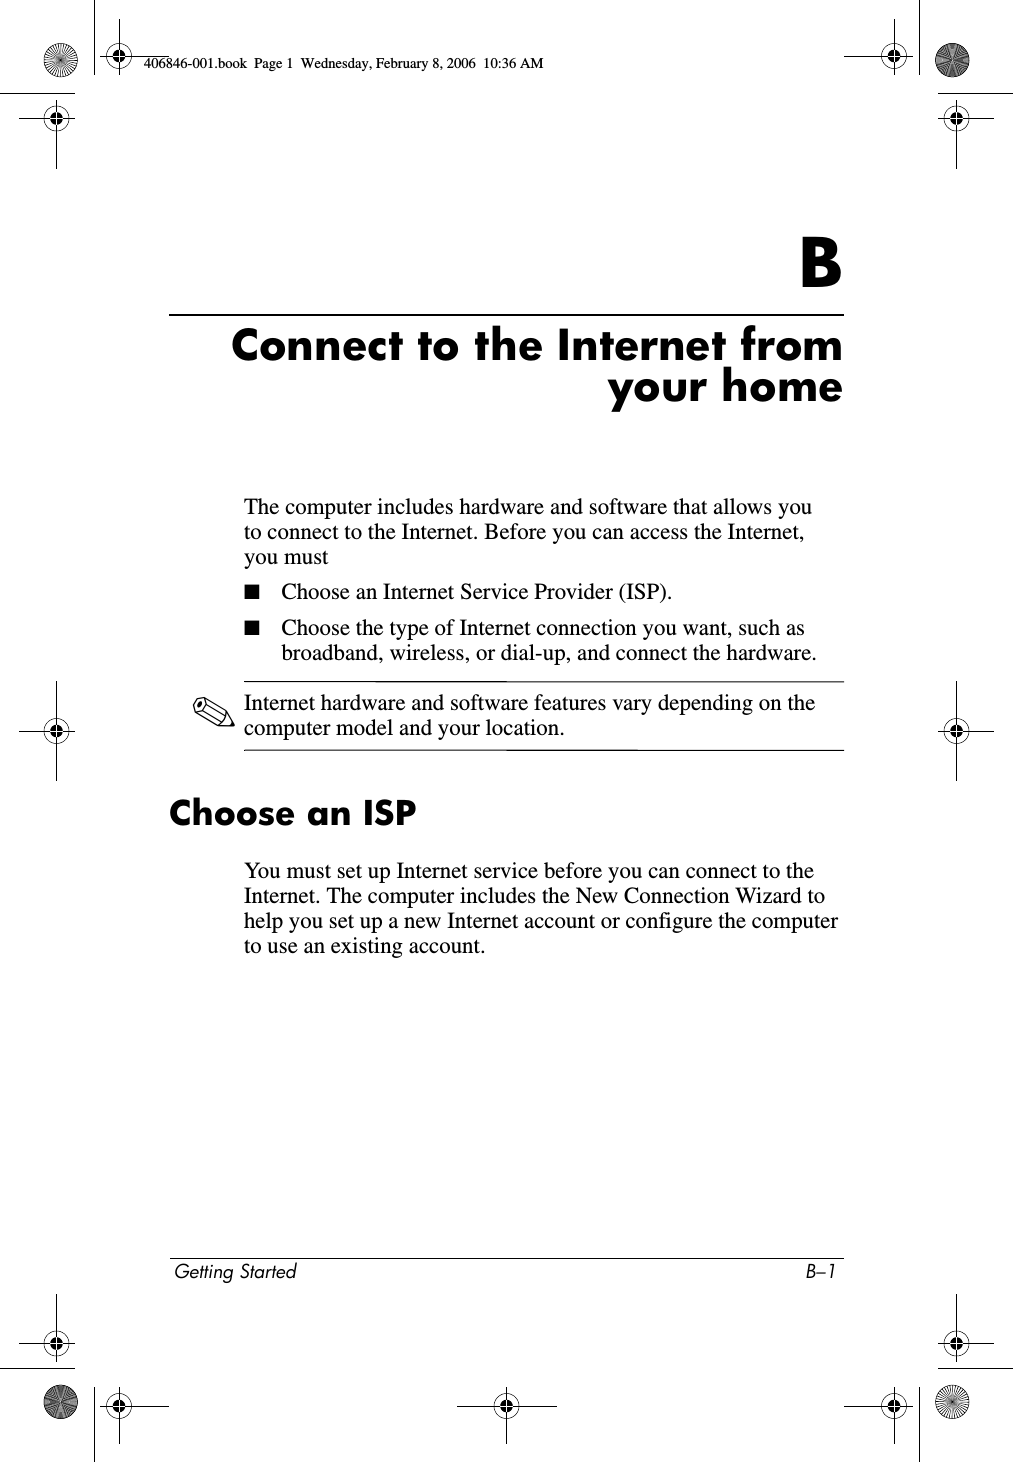 Getting Started B–1BConnect to the Internet fromyour homeThe computer includes hardware and software that allows you to connect to the Internet. Before you can access the Internet, you must■Choose an Internet Service Provider (ISP).■Choose the type of Internet connection you want, such as broadband, wireless, or dial-up, and connect the hardware.✎Internet hardware and software features vary depending on the computer model and your location.Choose an ISPYou must set up Internet service before you can connect to the Internet. The computer includes the New Connection Wizard to help you set up a new Internet account or configure the computer to use an existing account.406846-001.book  Page 1  Wednesday, February 8, 2006  10:36 AM